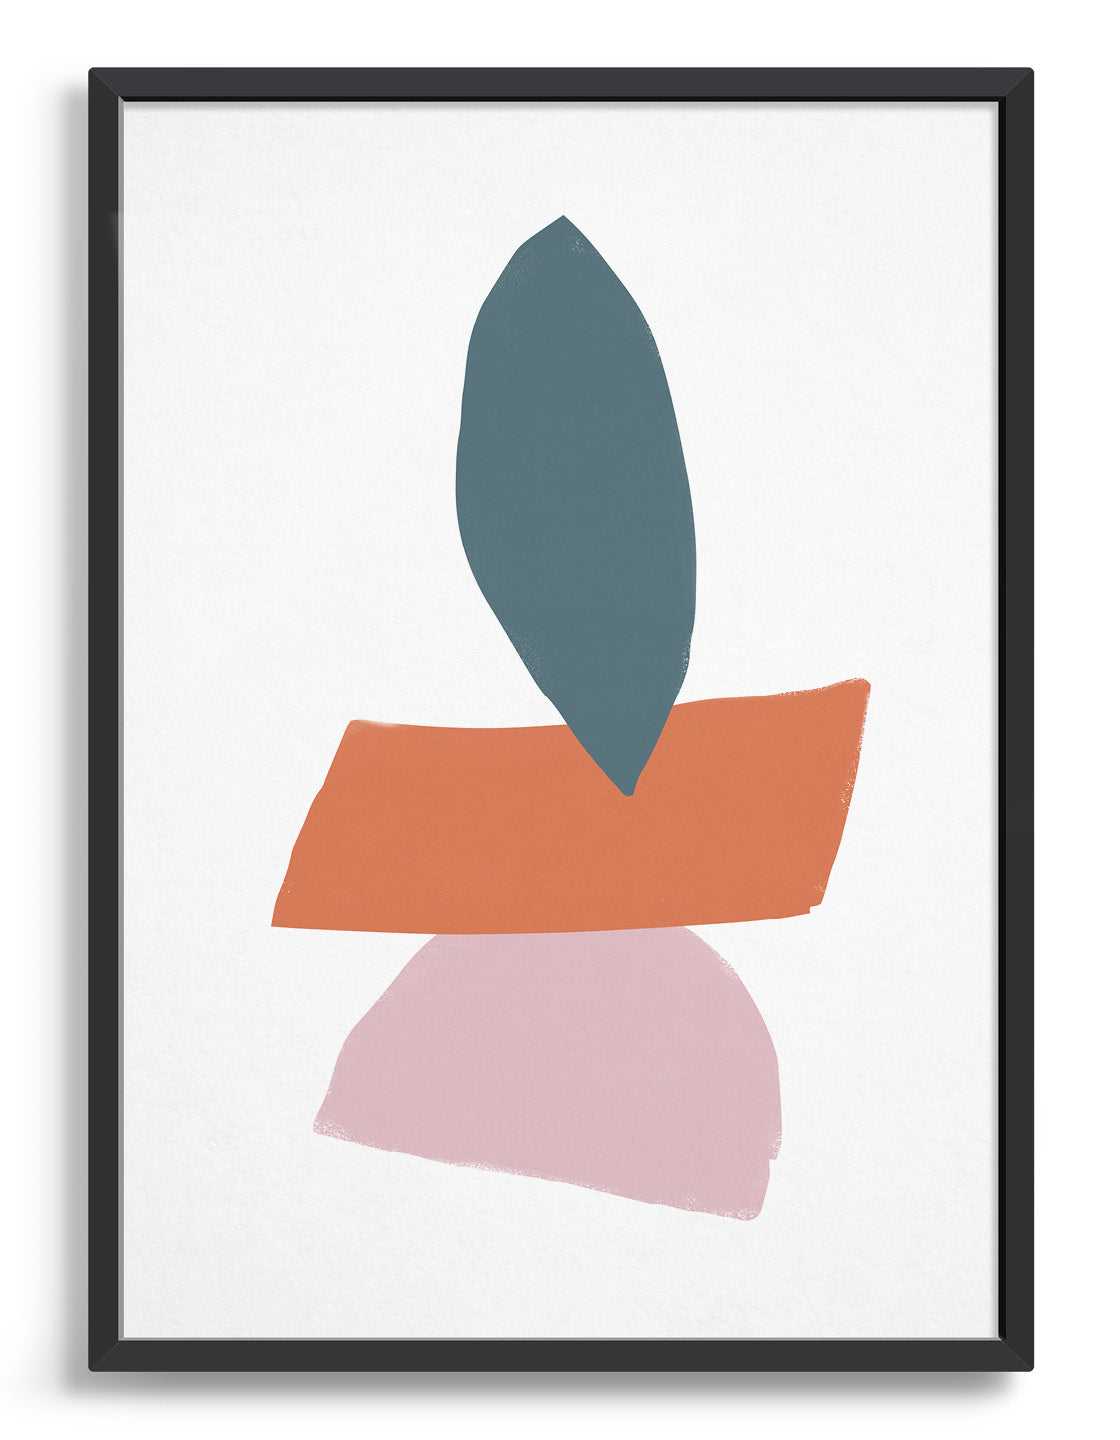 Nature inspired abstract print of stacked stones with dark grey oval stone on top of orange rectangular stone on top of pink semi circle stone